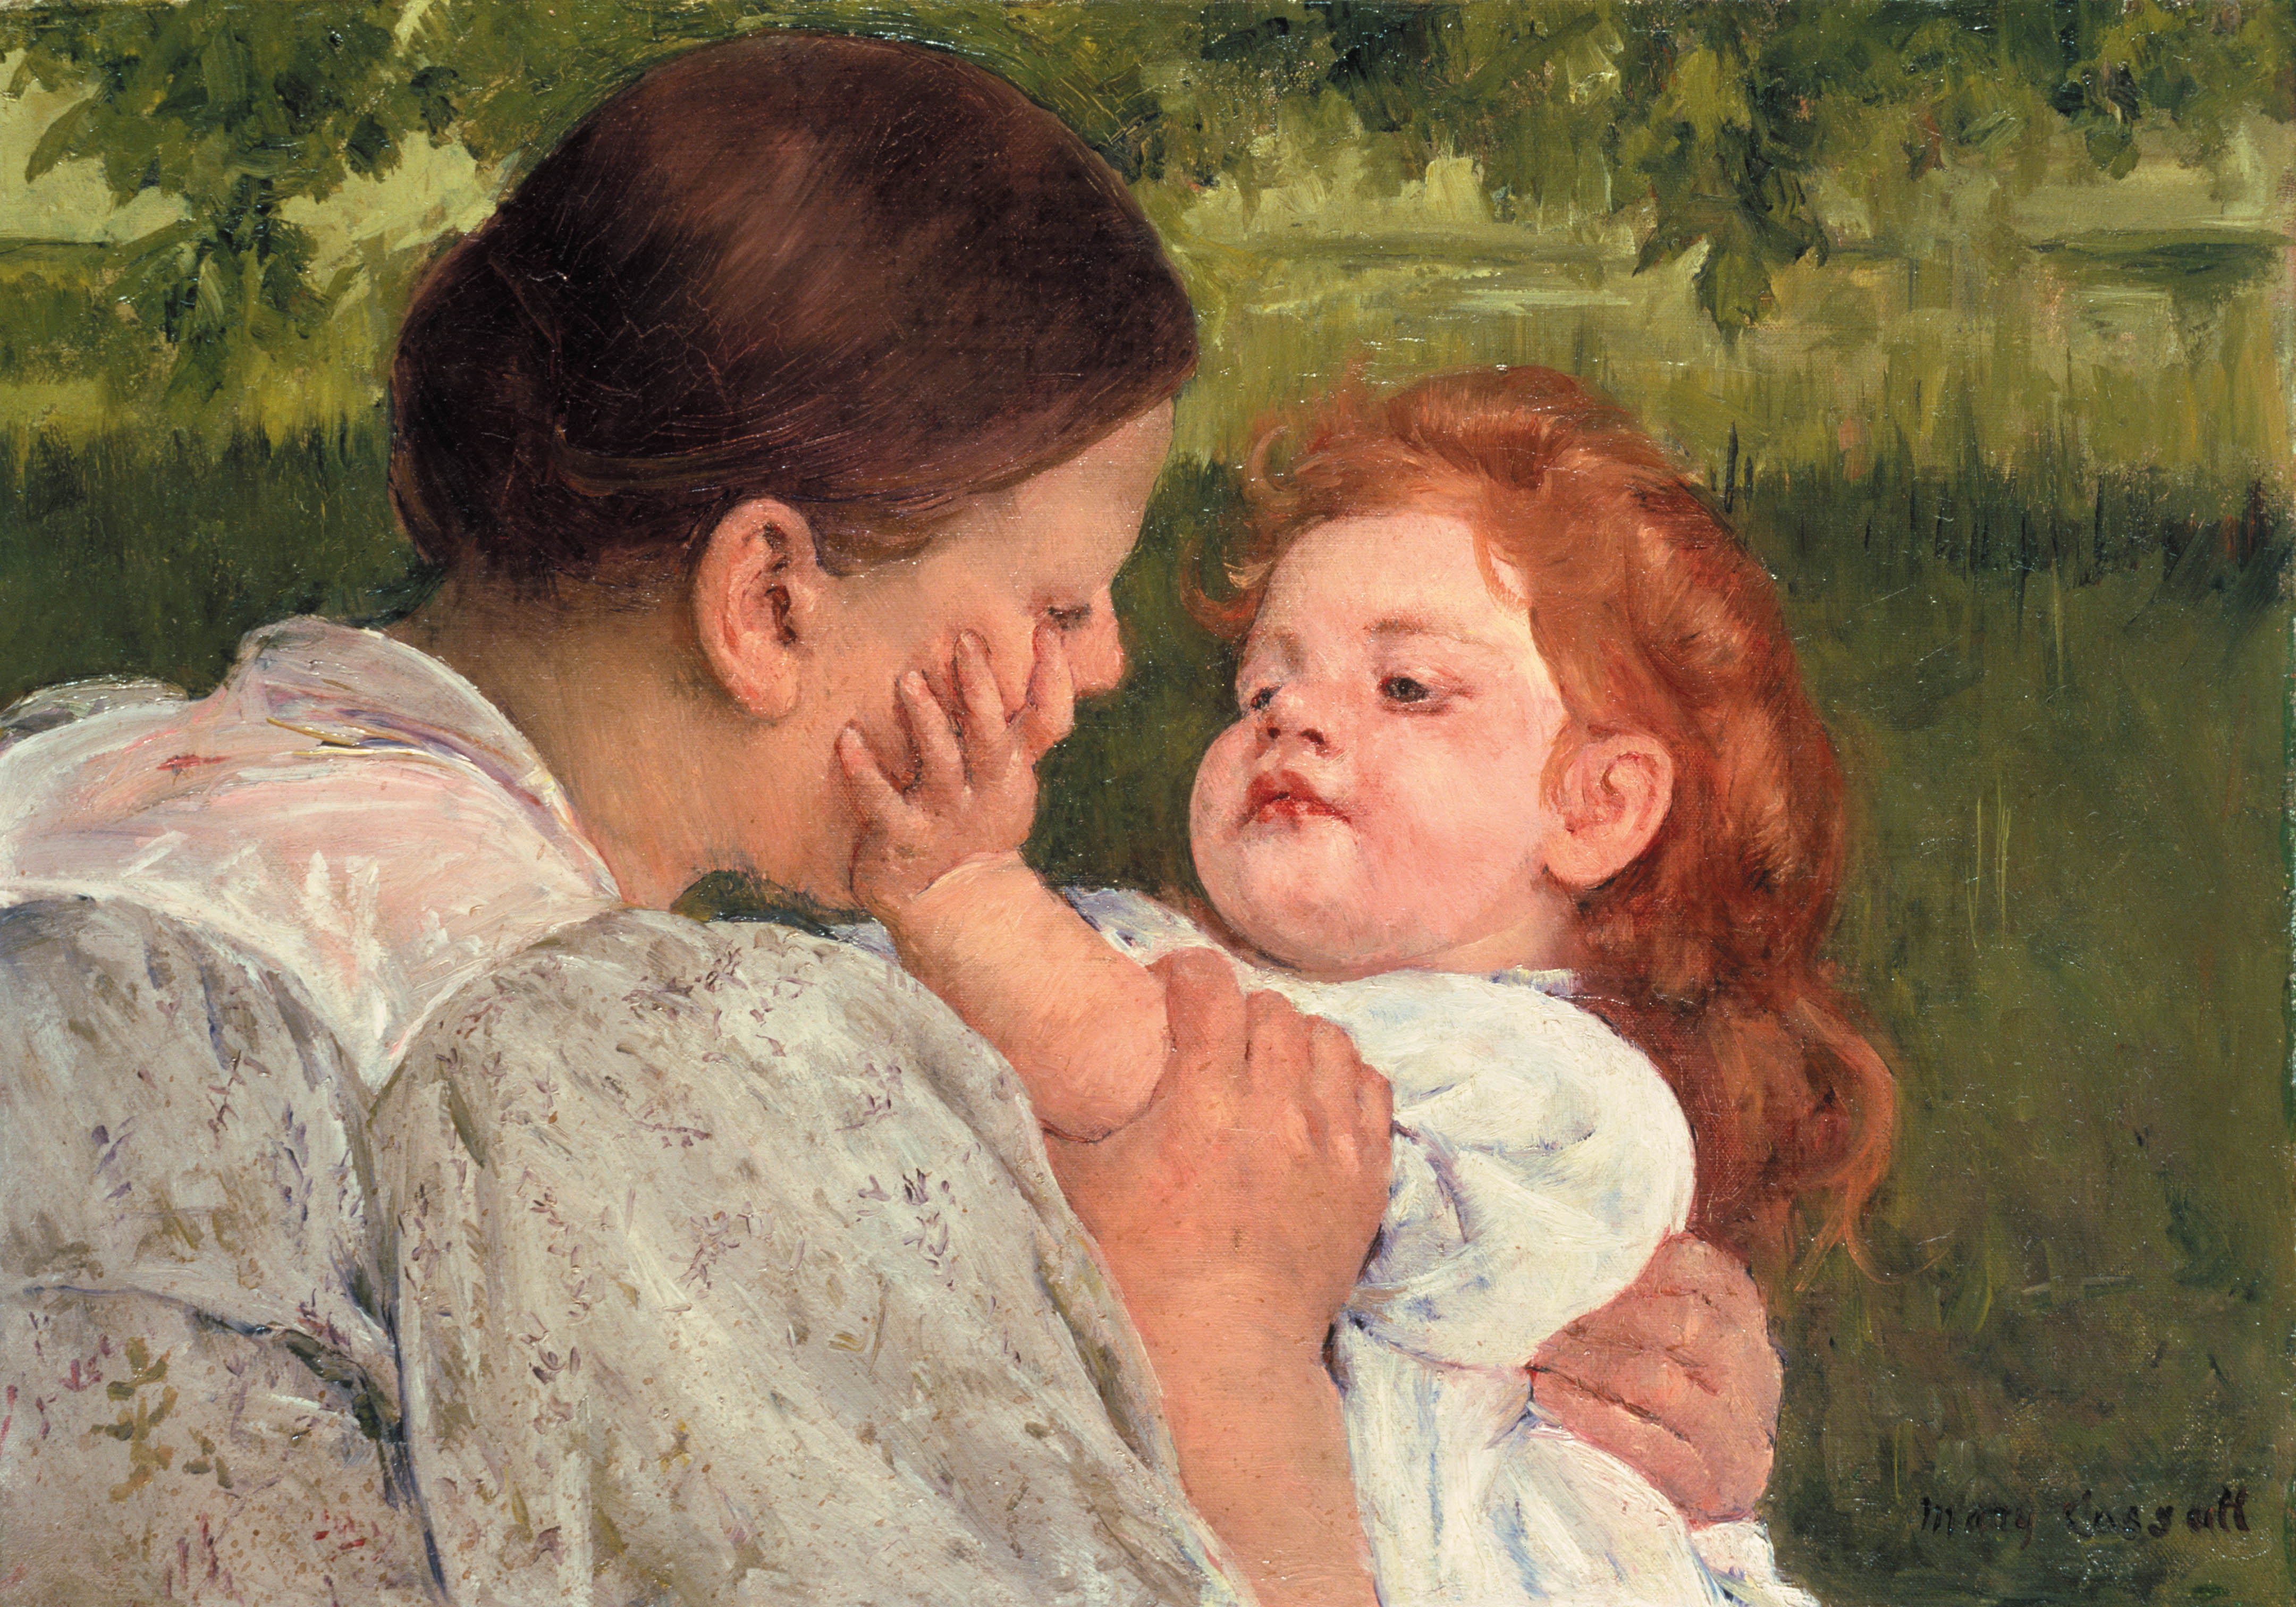 A little kid is holding her mom's face, oild paining